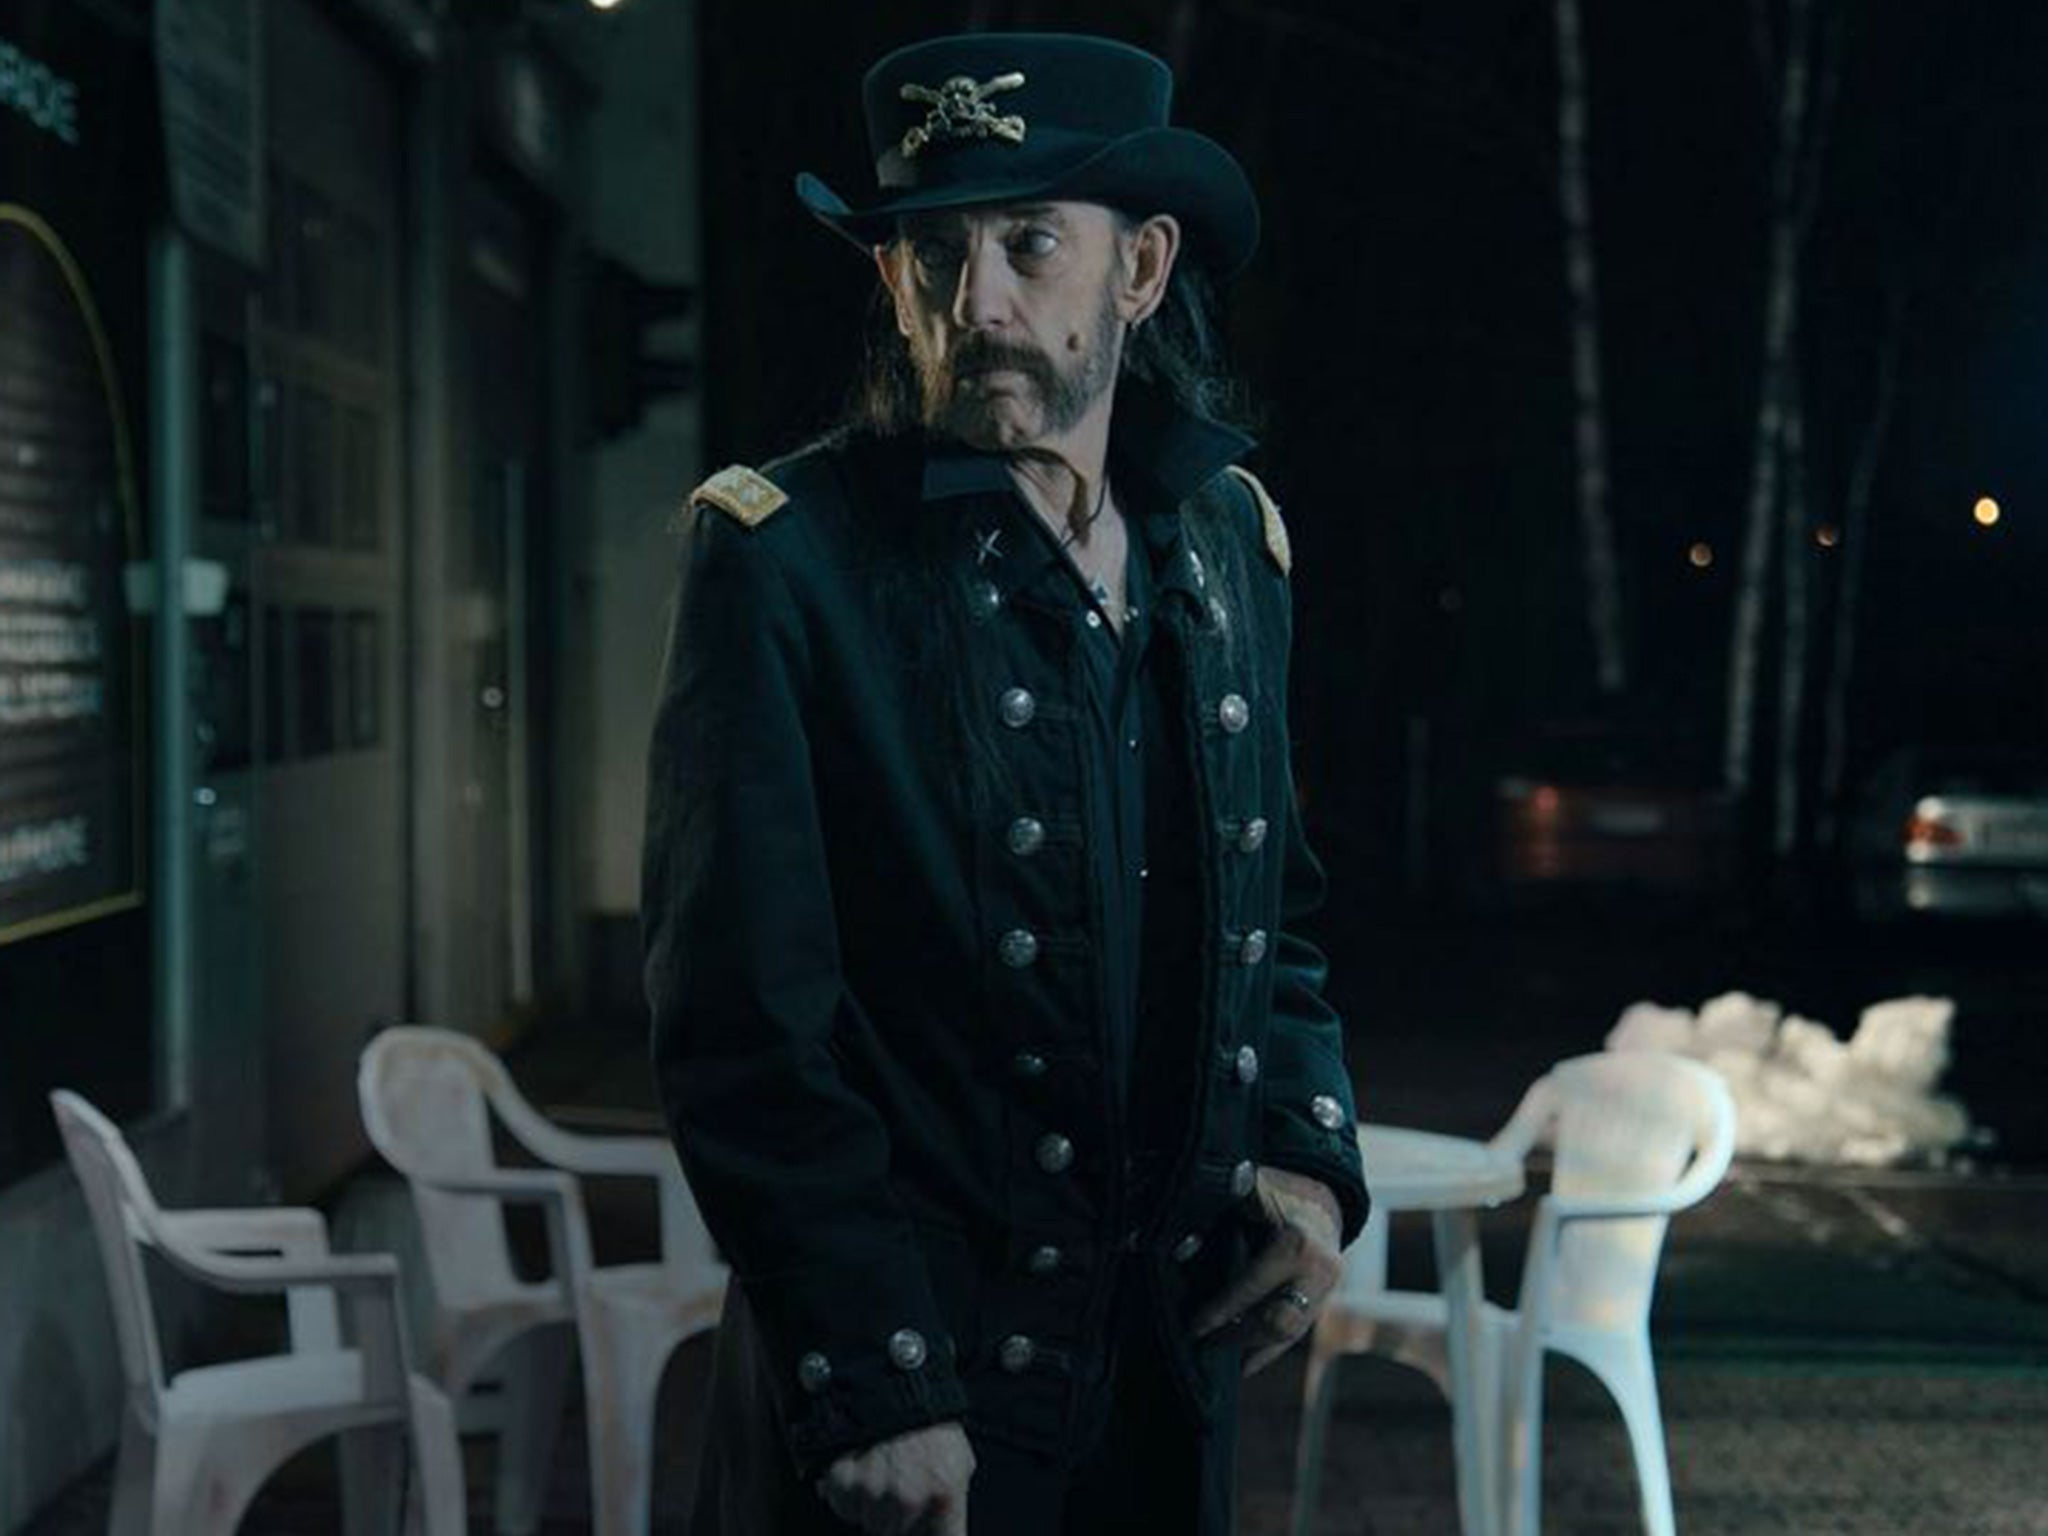 Lemmy stars in a Finnish advert filmed less than a month before he died.